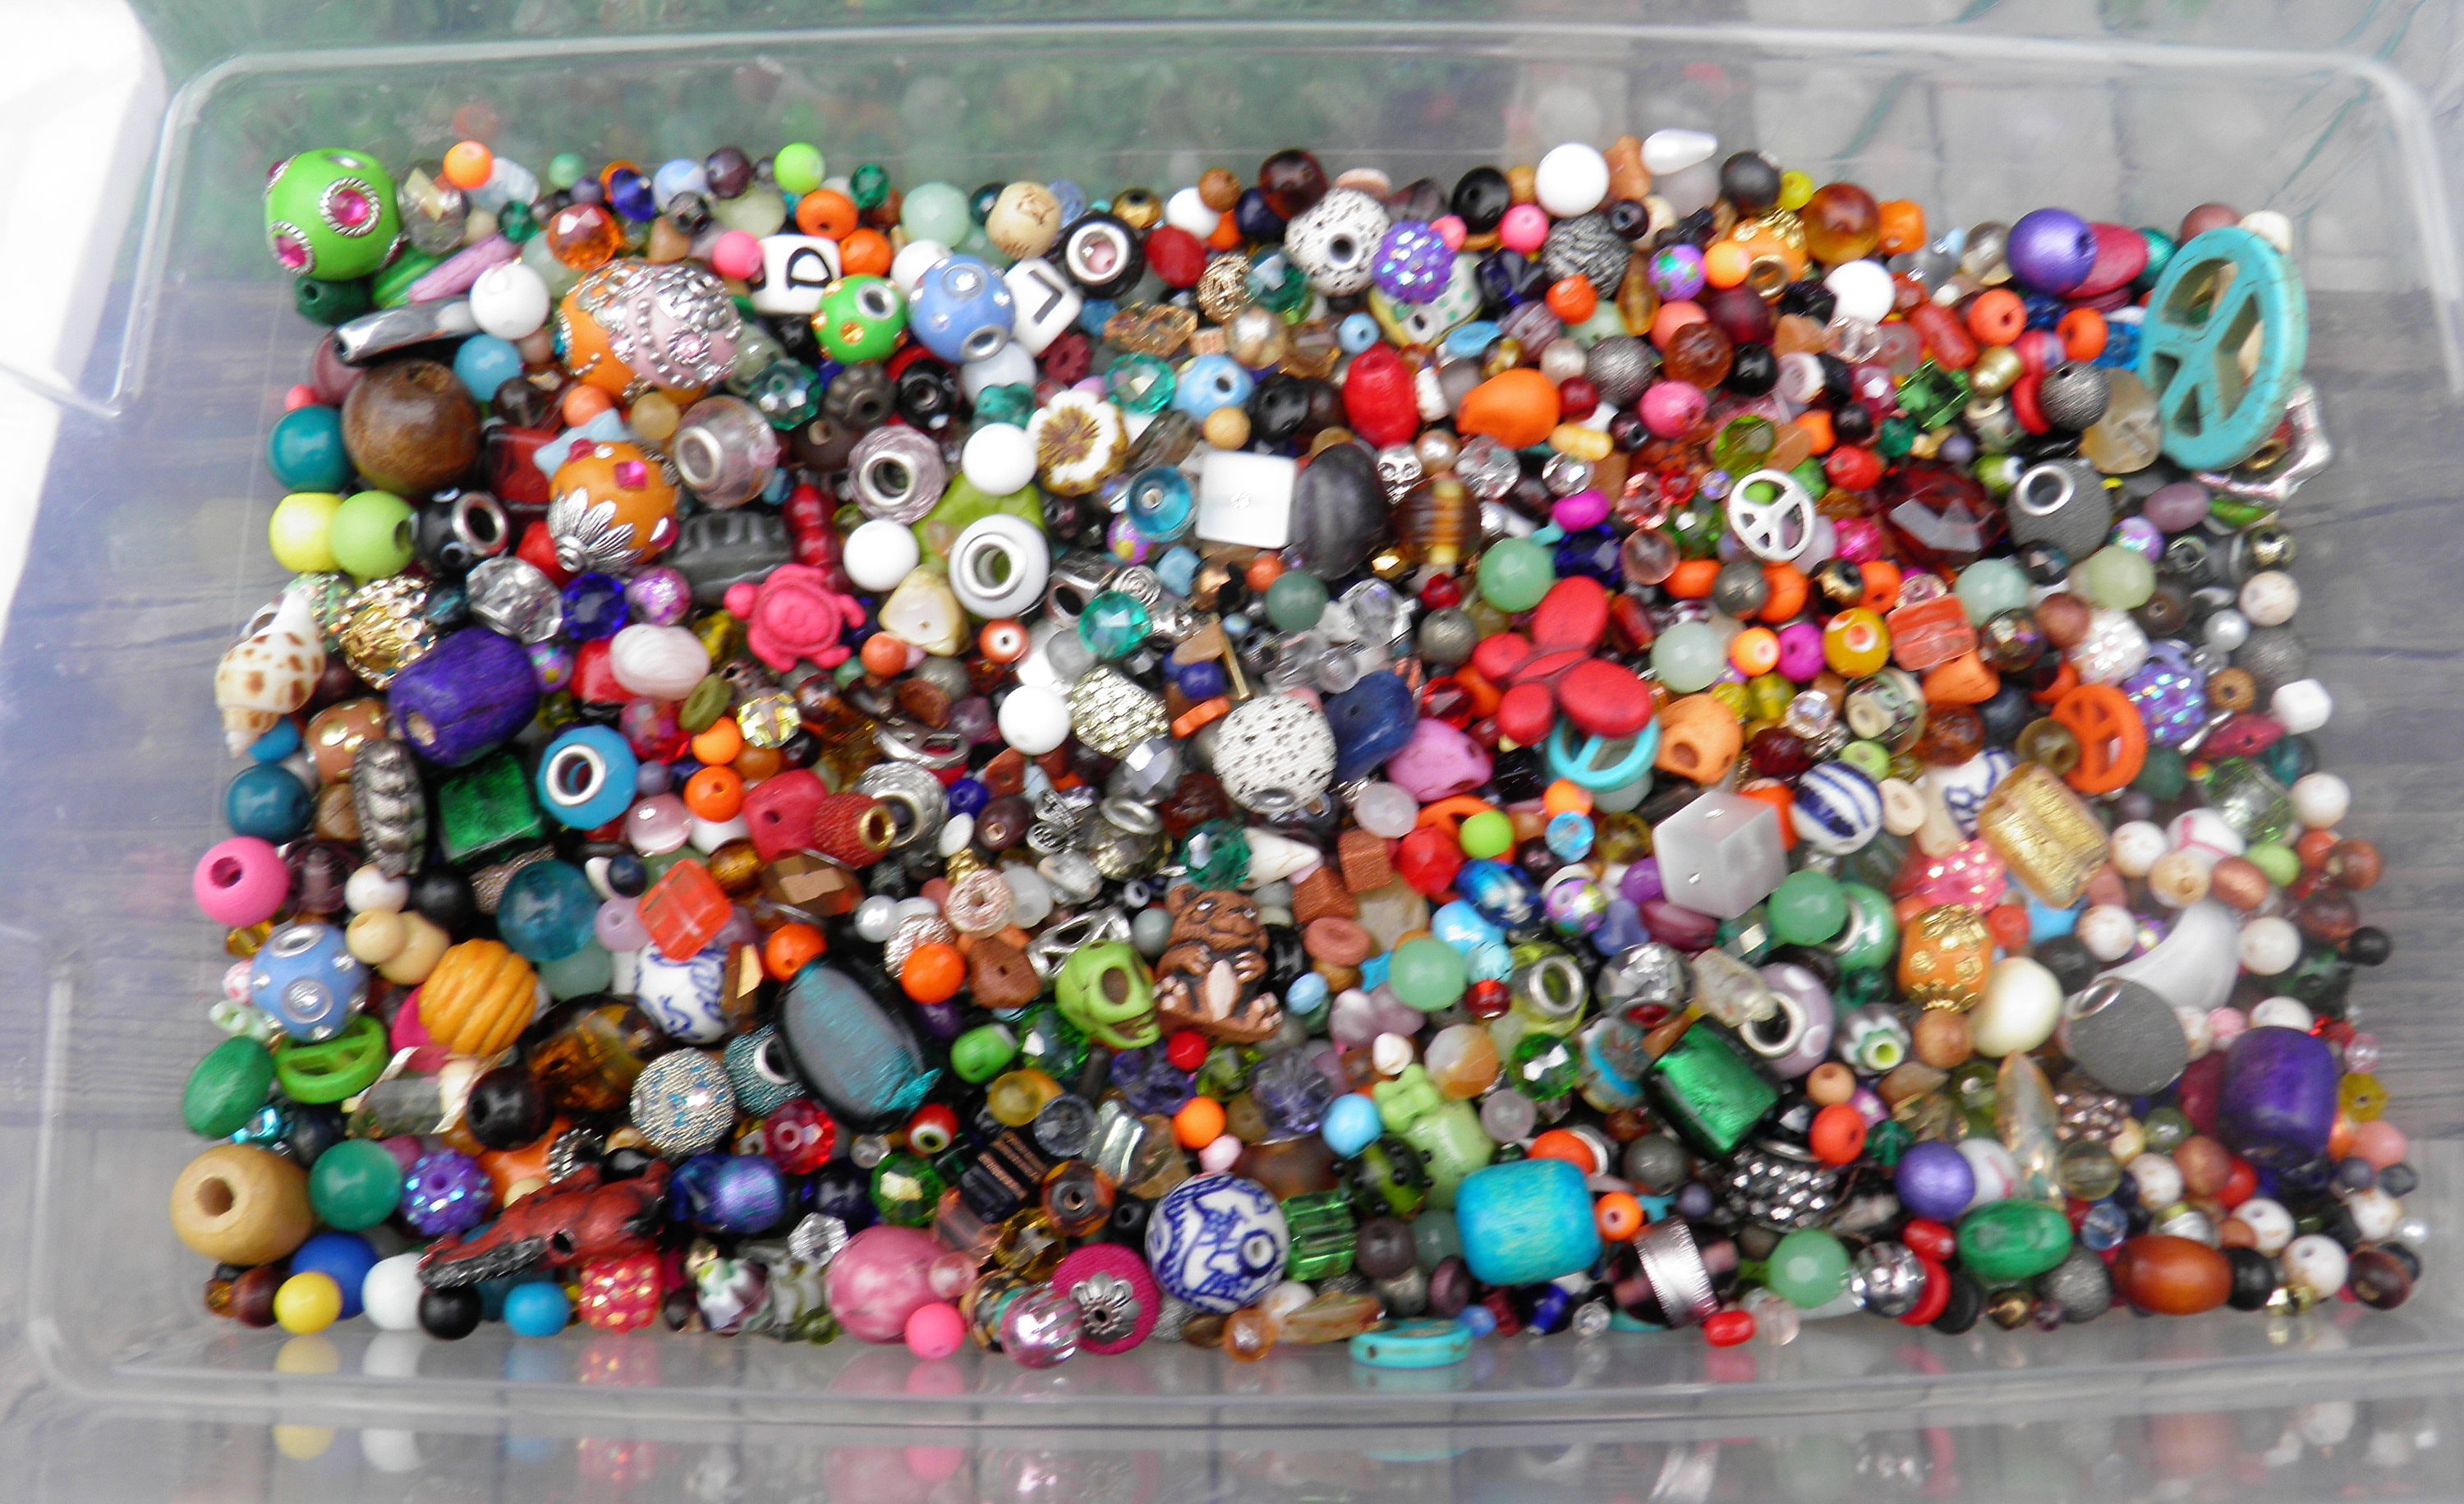  Indian Shelf 90 Piece Beads-Assorted Glass Beads for